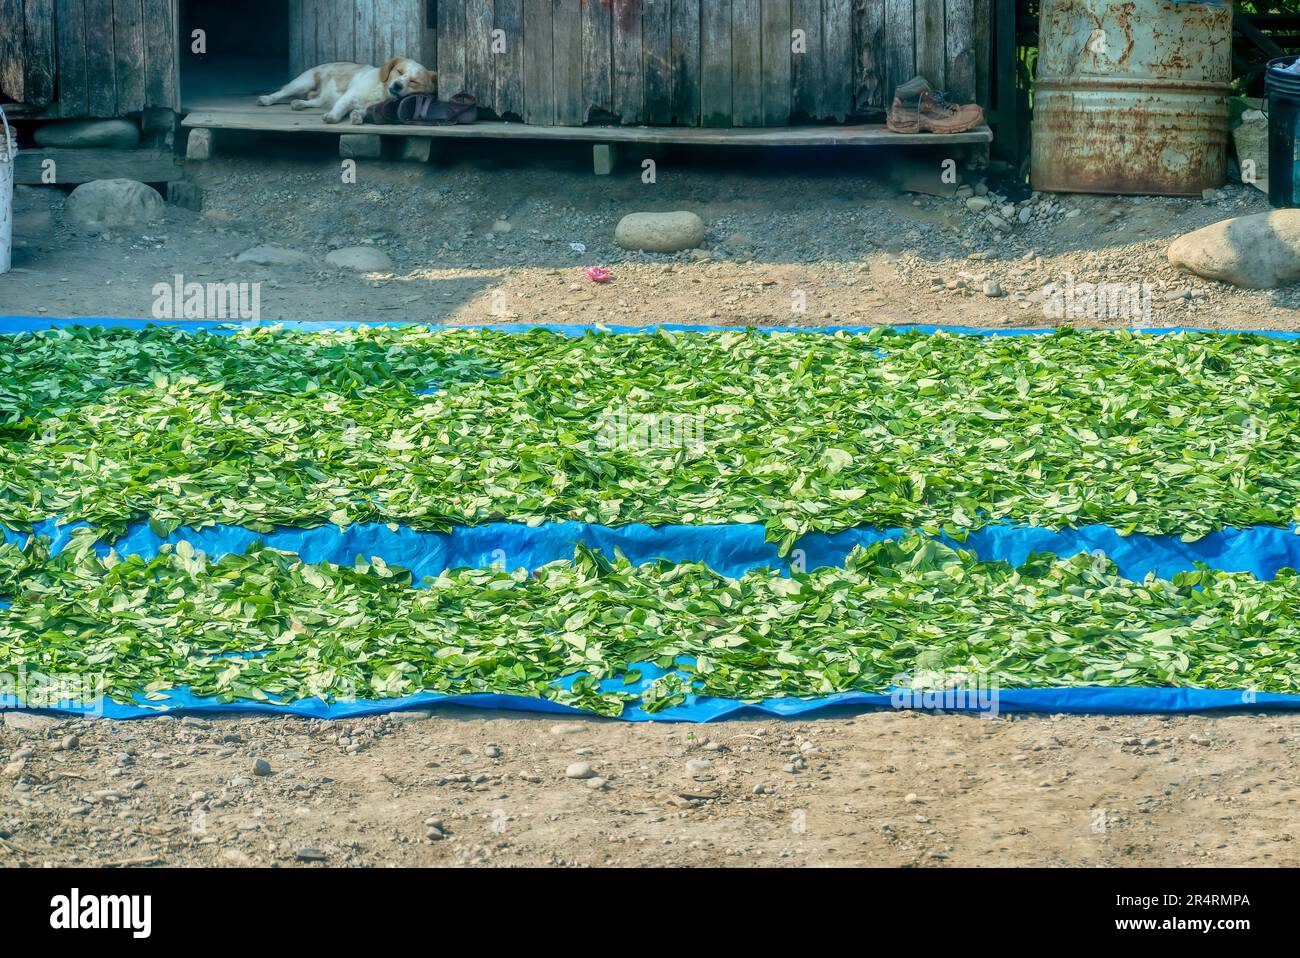 Freshly harvested coca leaves being air-dried beside a road in Peru. These are used for tea, chewing, or as an ingredient for cocaine production. Stock Photo